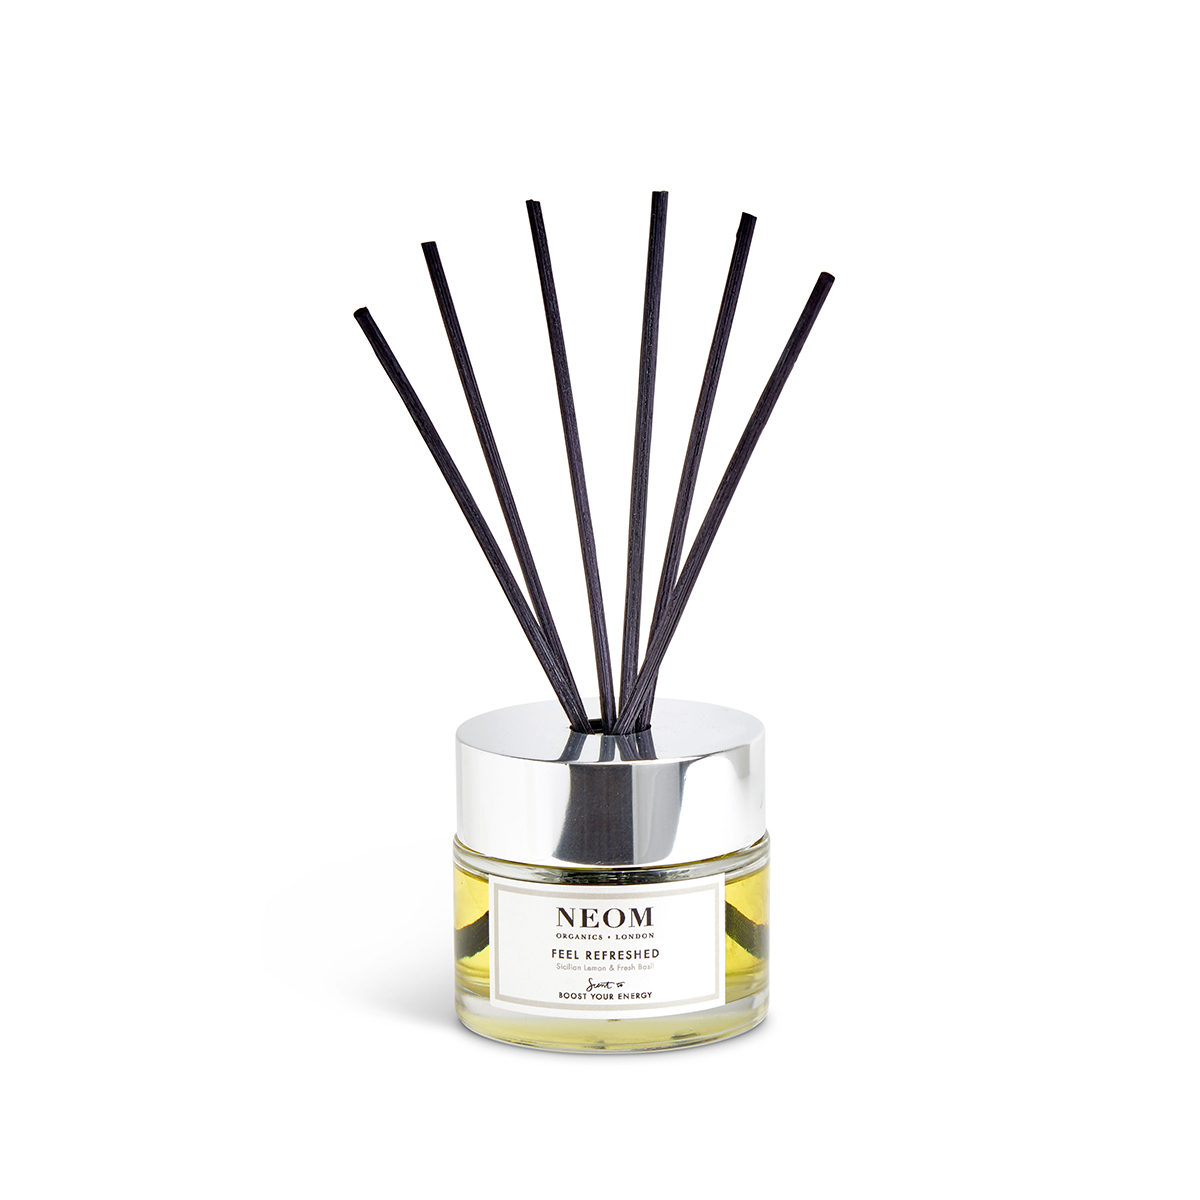 Neom FEEL REFRESHED REED DIFFUSER 100ML